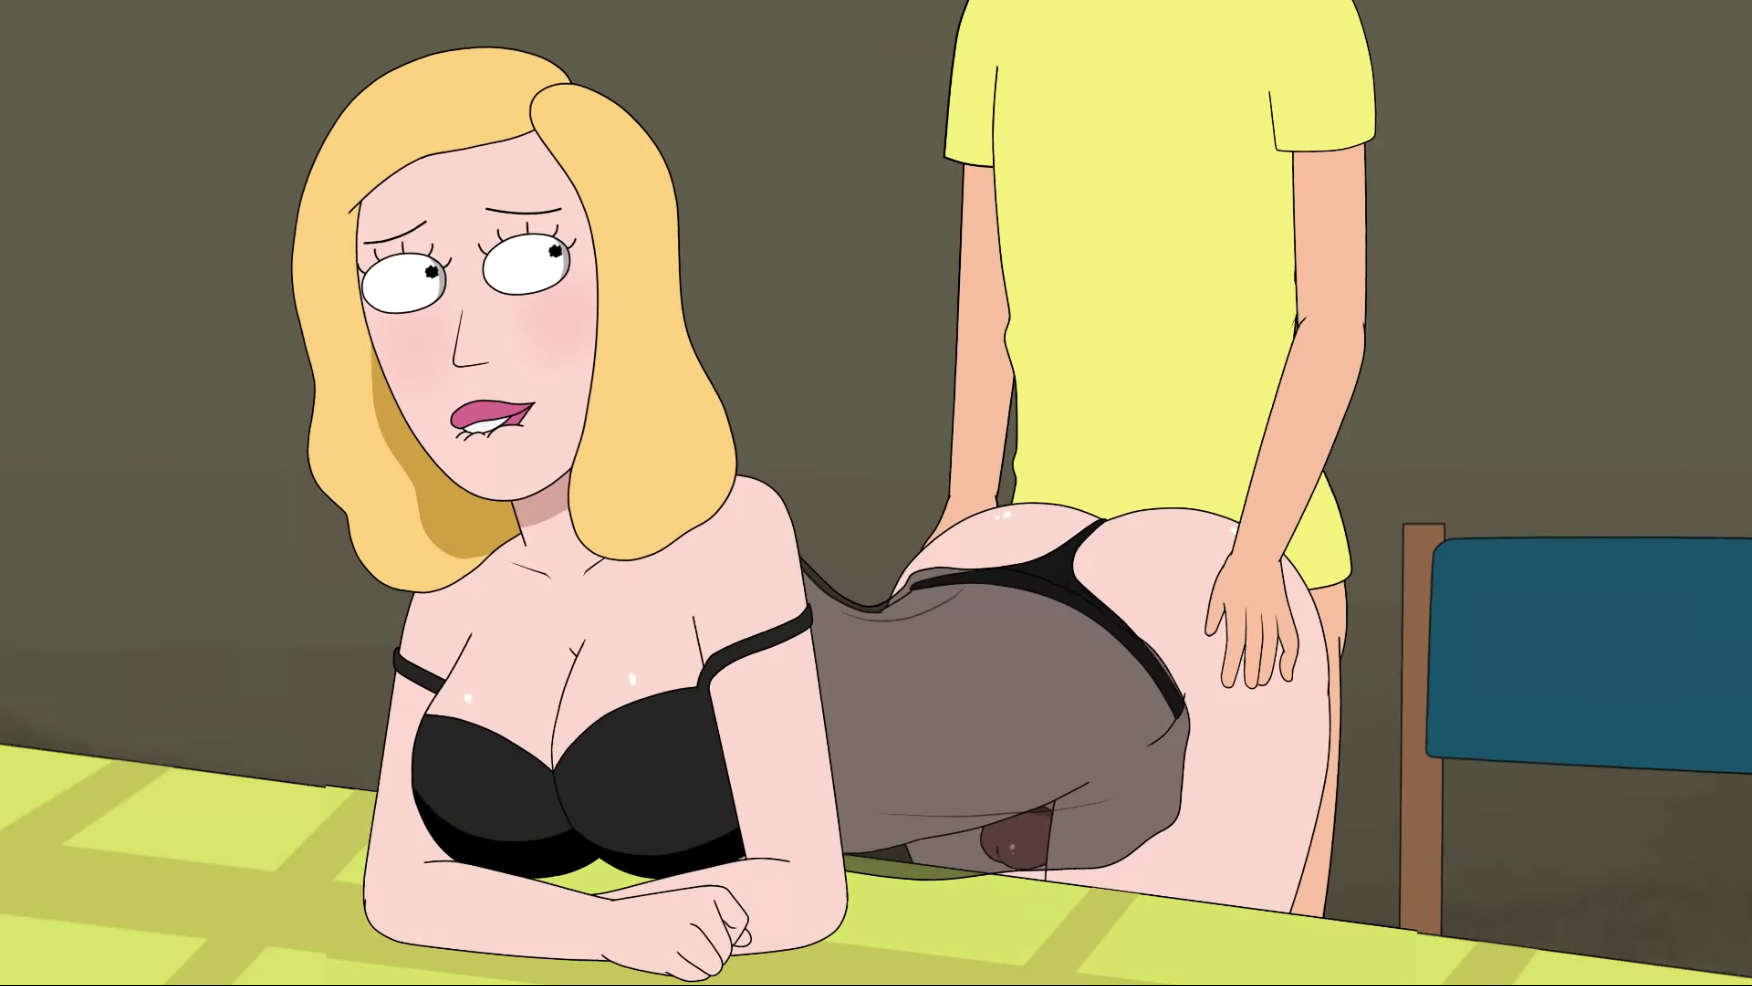 david edstrom recommends rick and morty animated porn pic